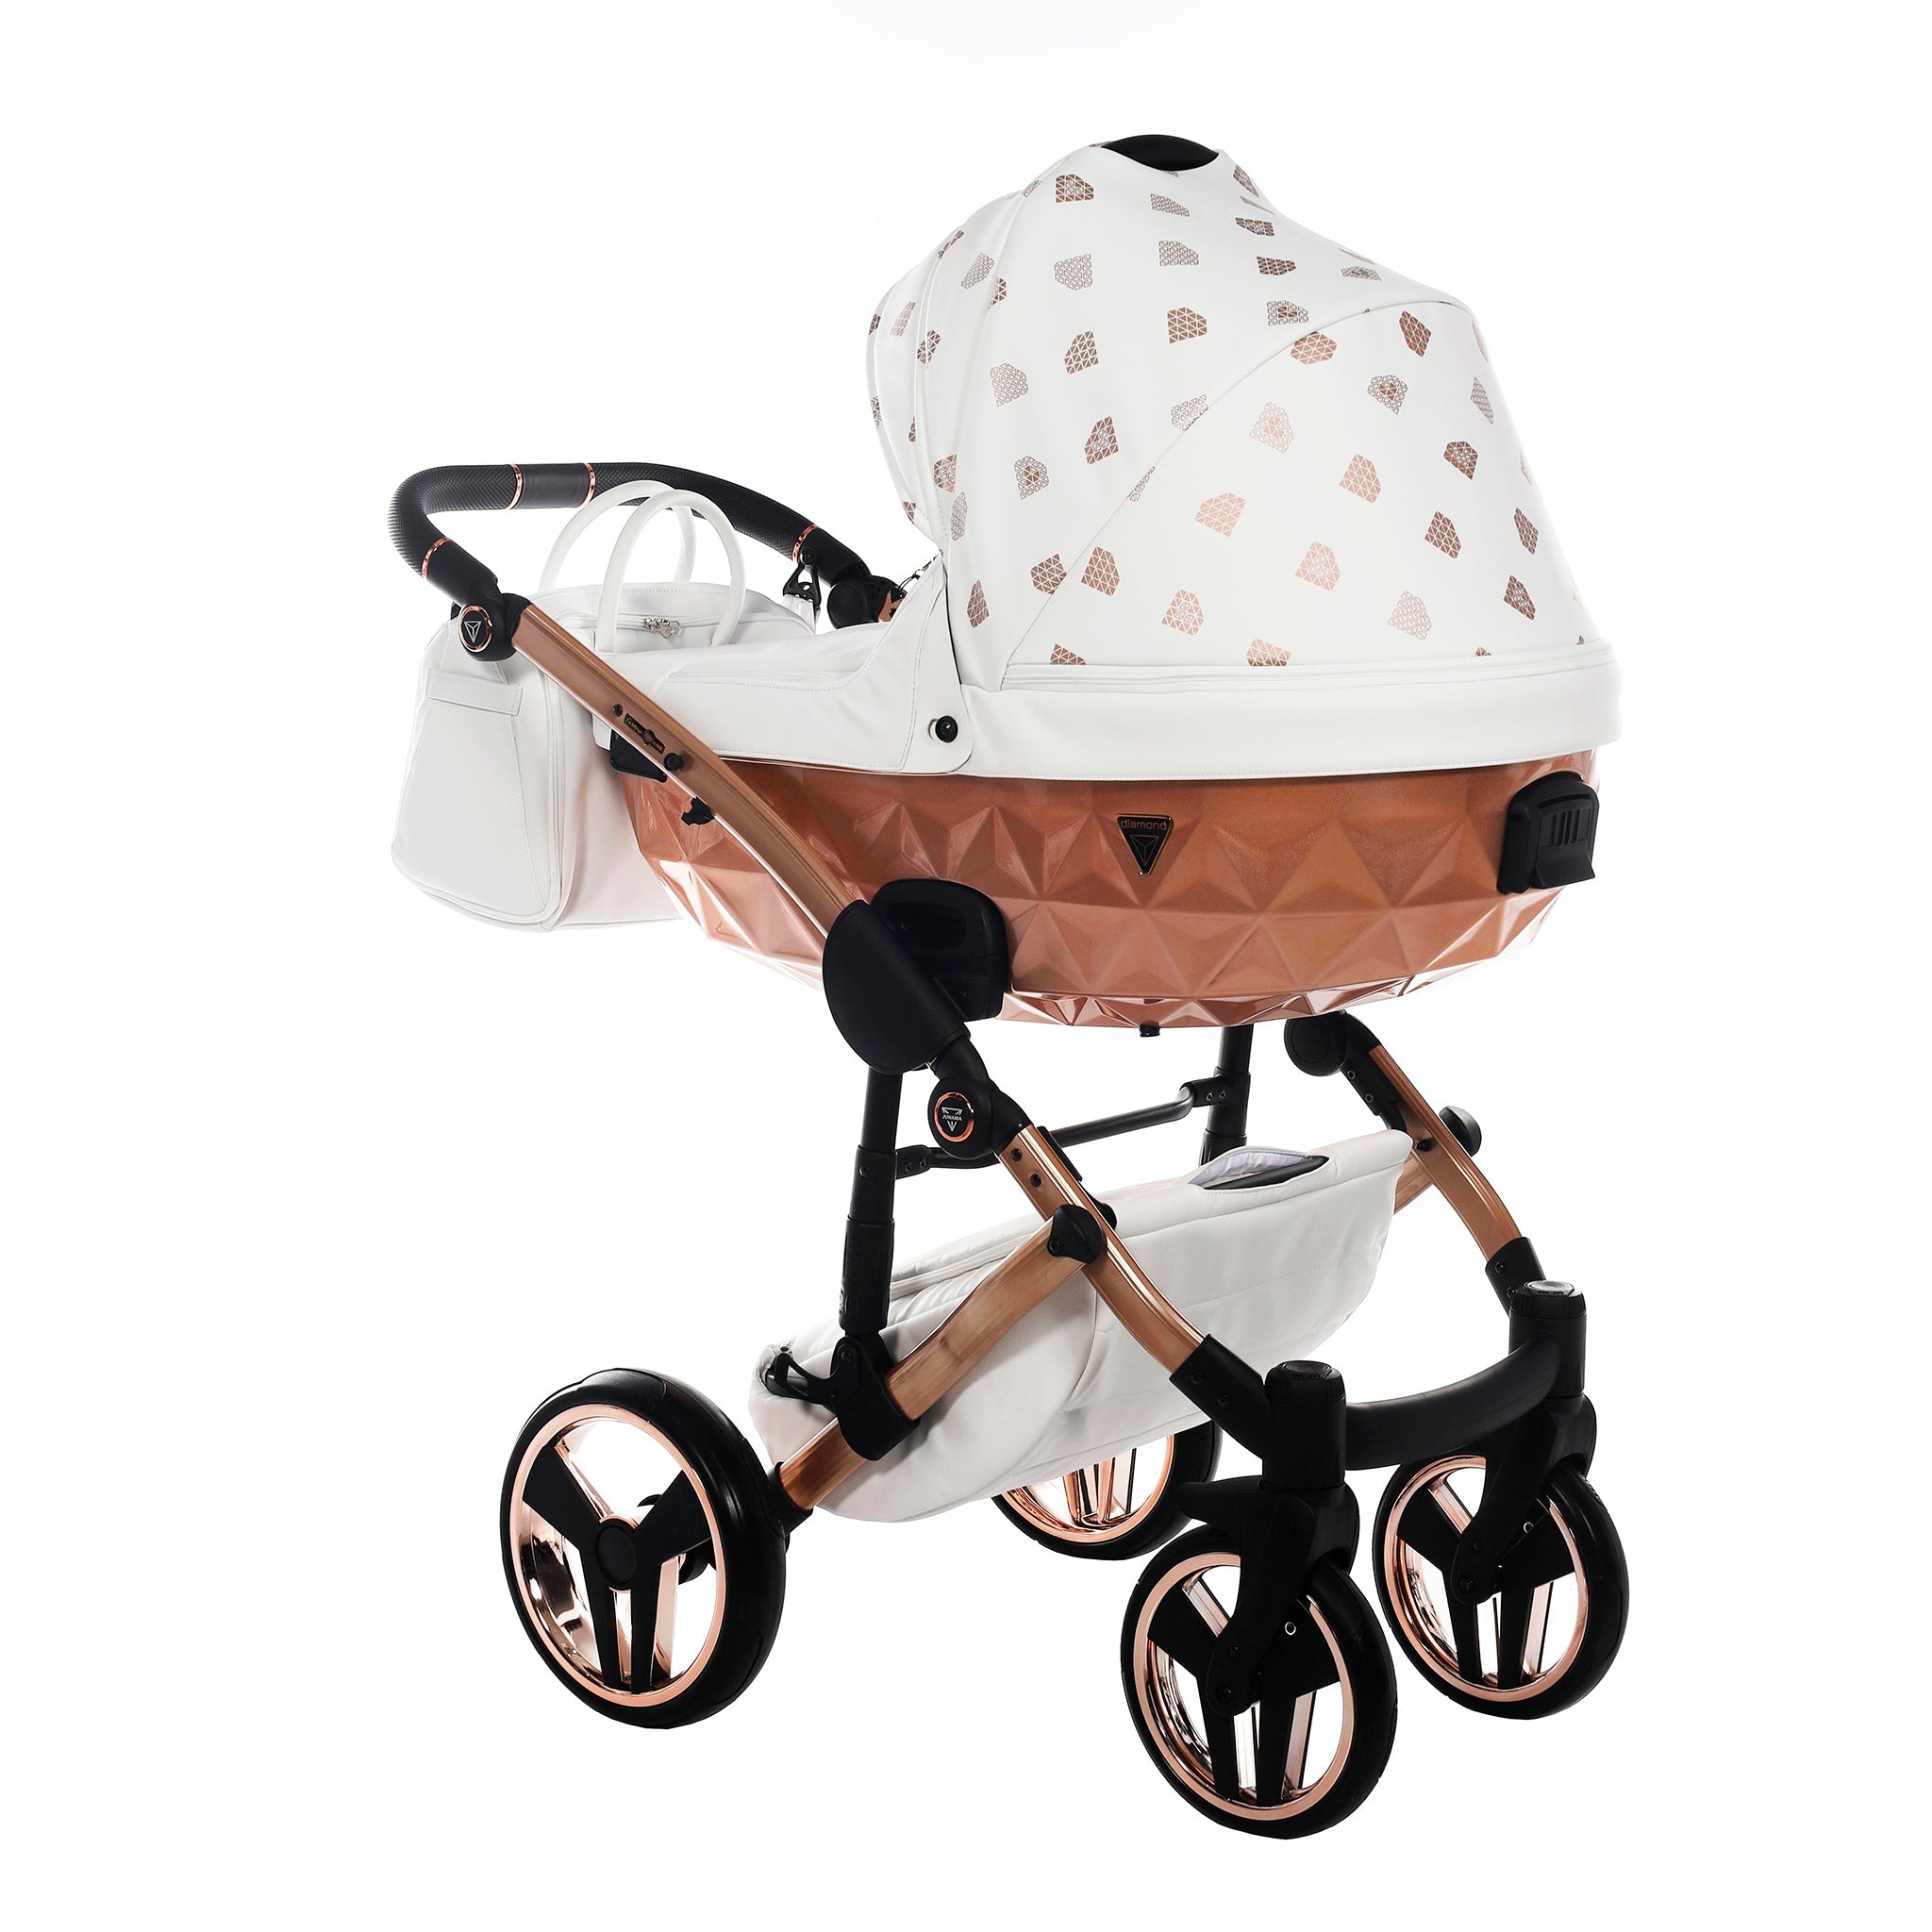 Junama GLOW, baby prams or stroller 2 in 1 - Rose Gold and White, Code number: JUNGLW01